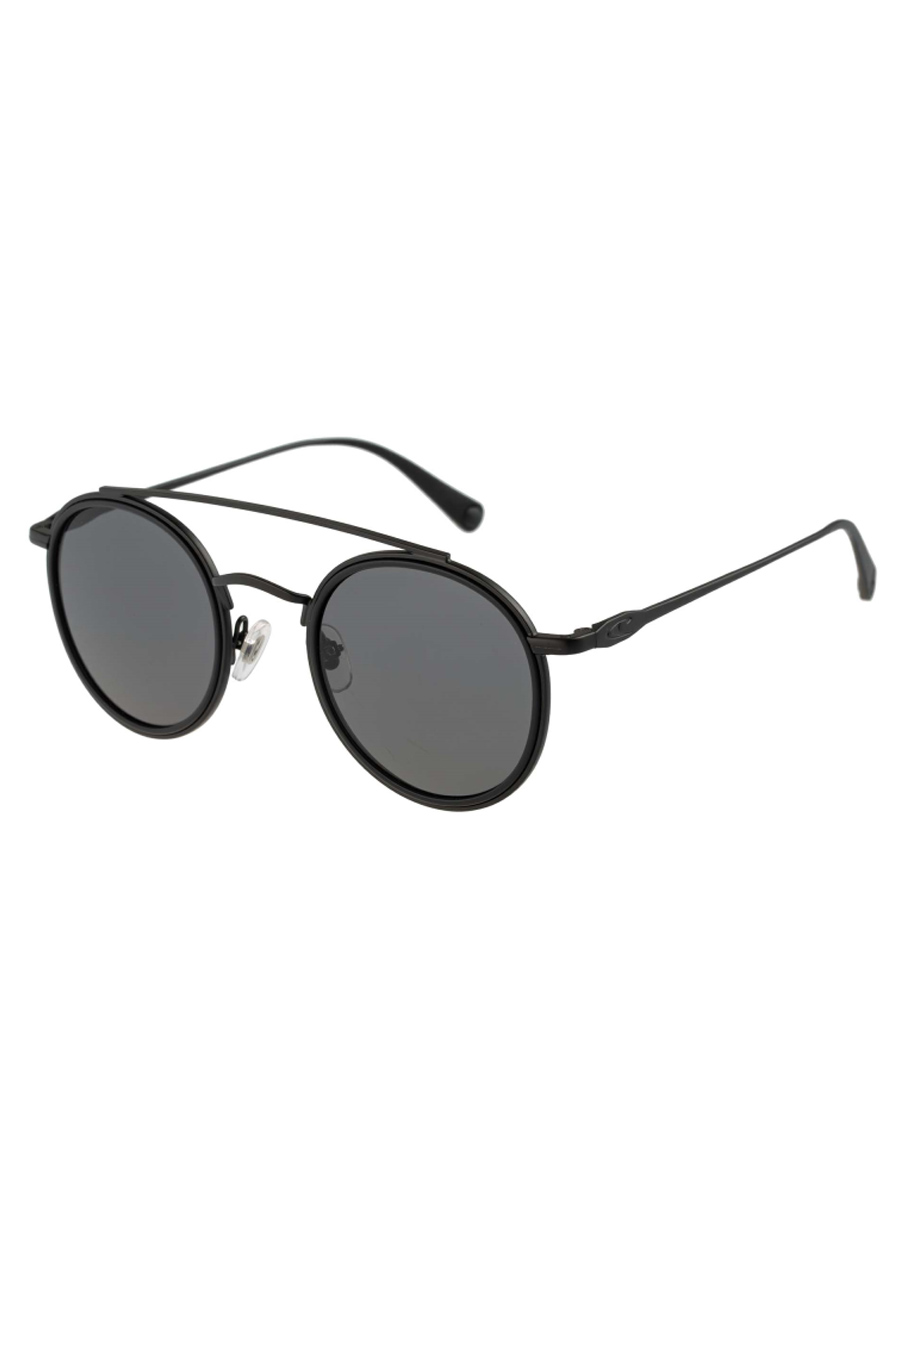 Saulesbrilles ONEILL ONS-CARILLO20-BLK